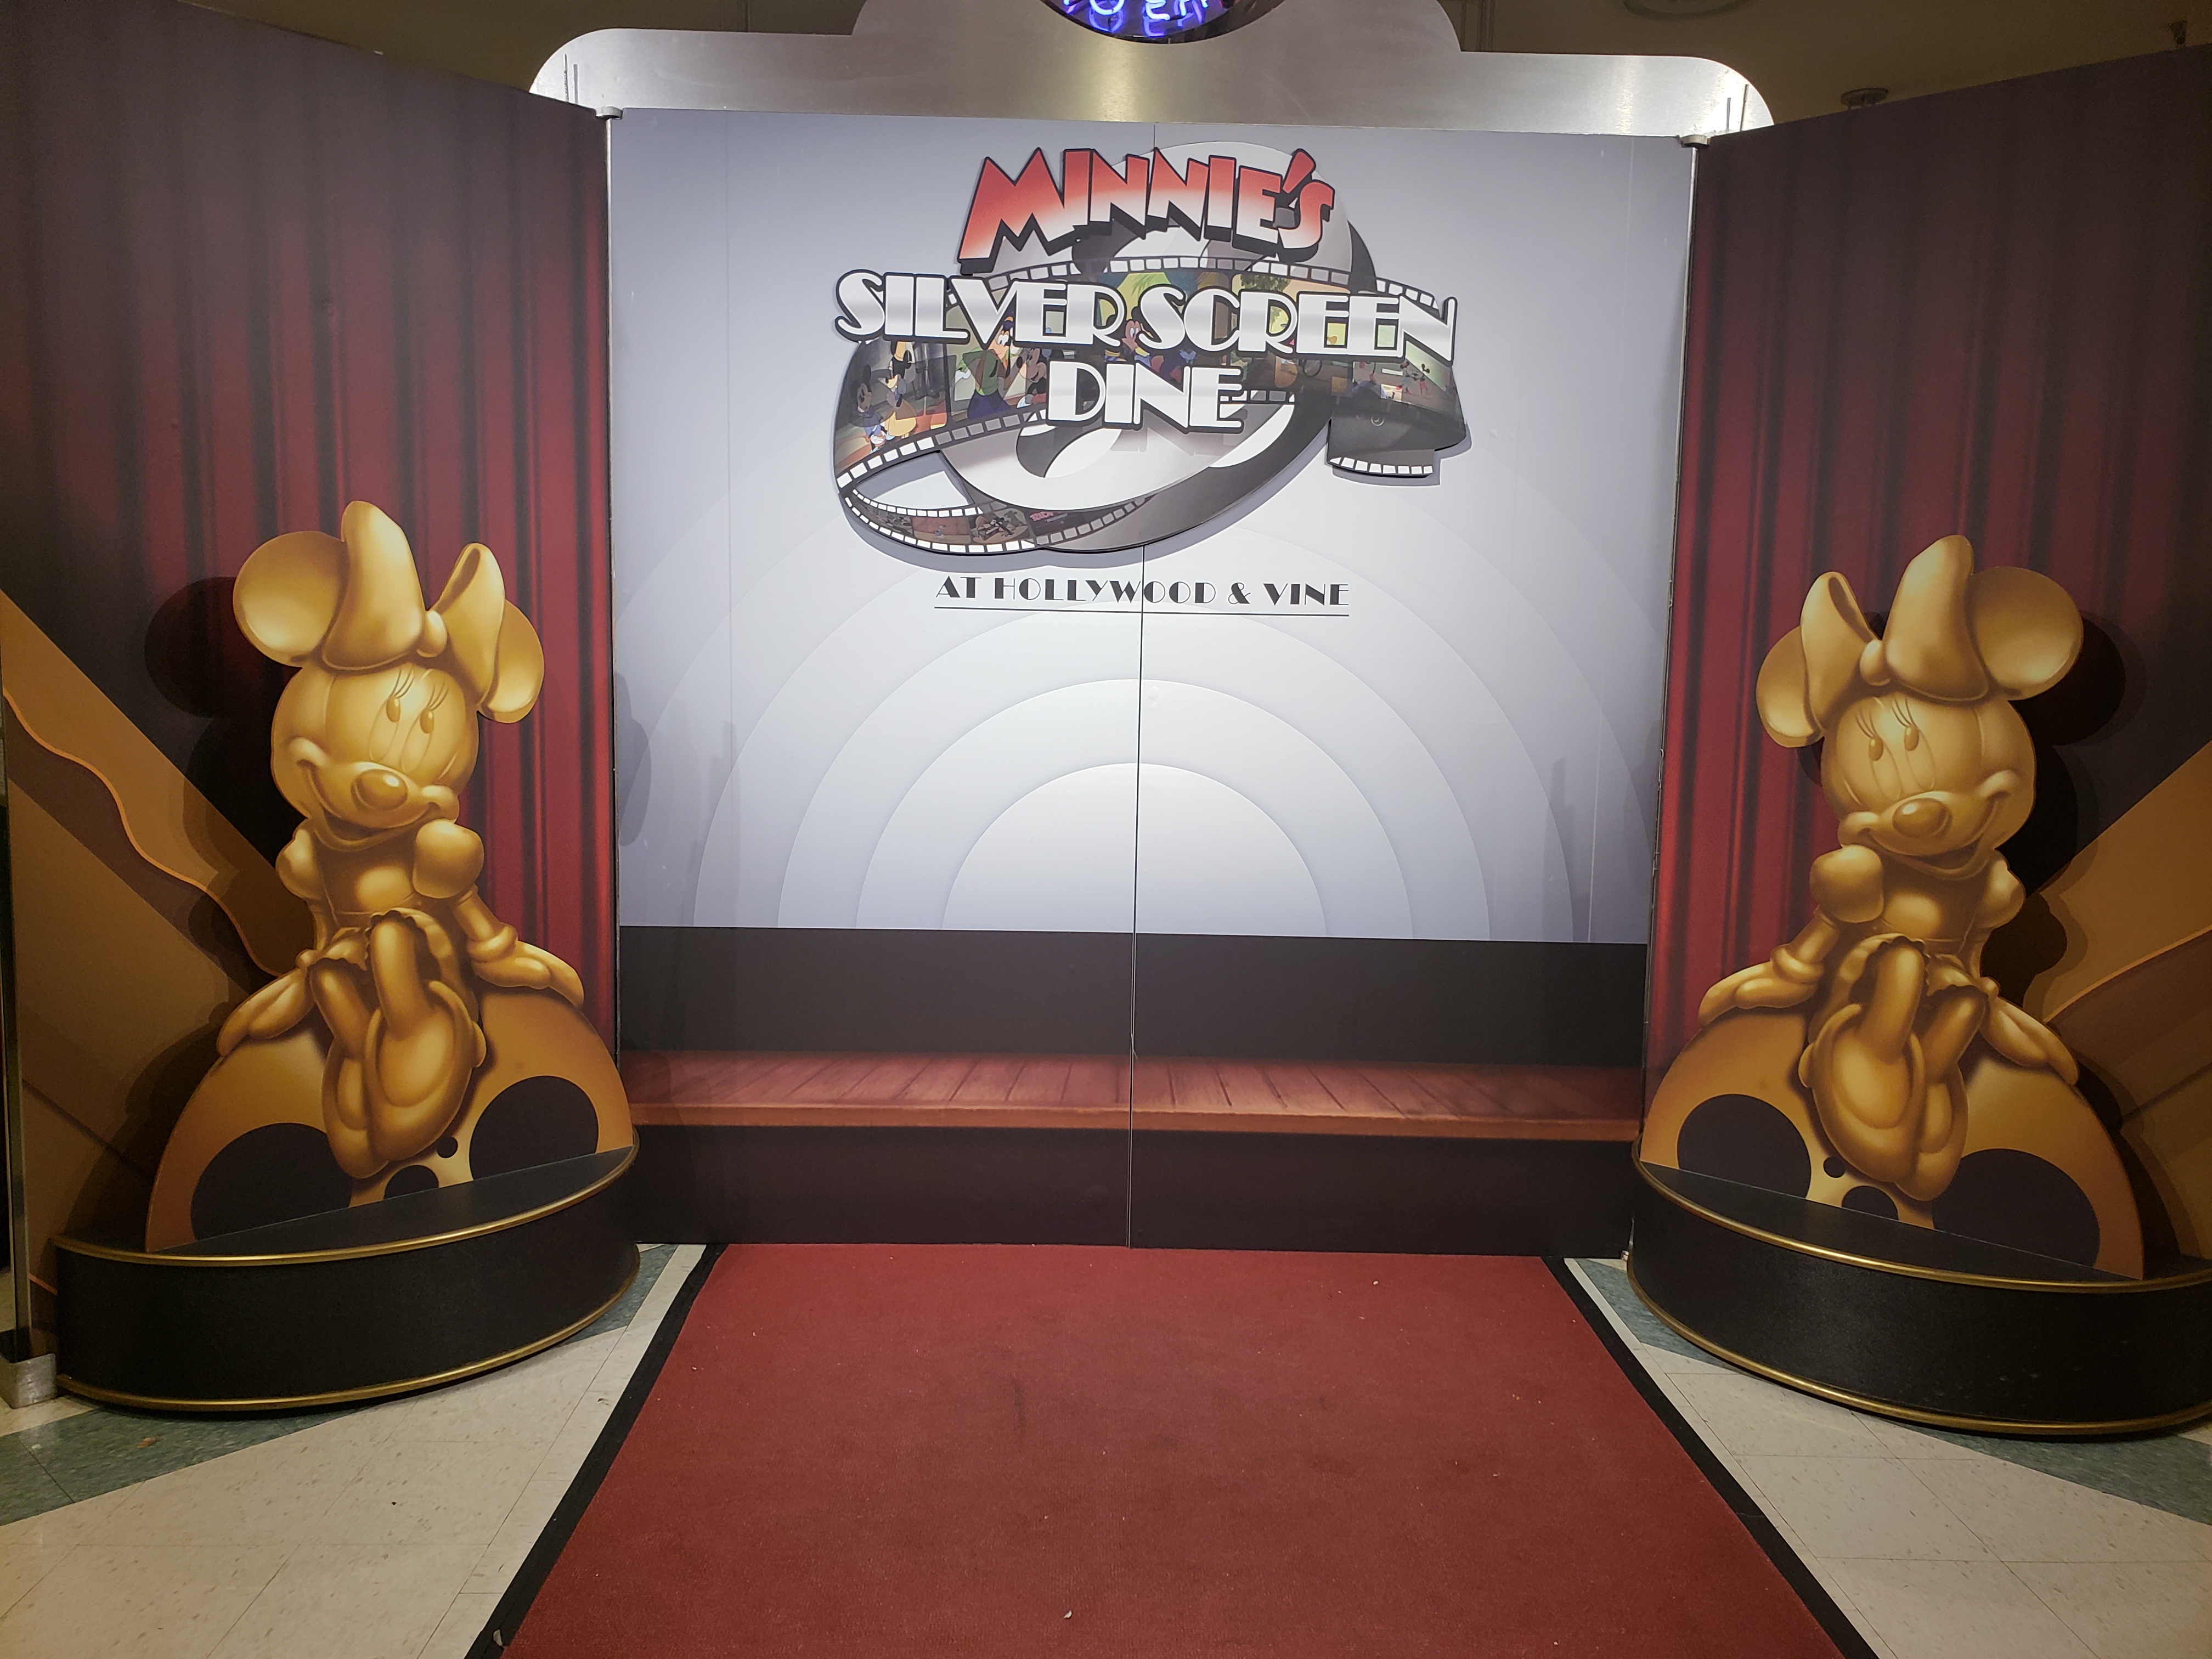 Minnie’s Silver Screen Dine Offers Red Carpet Treatment